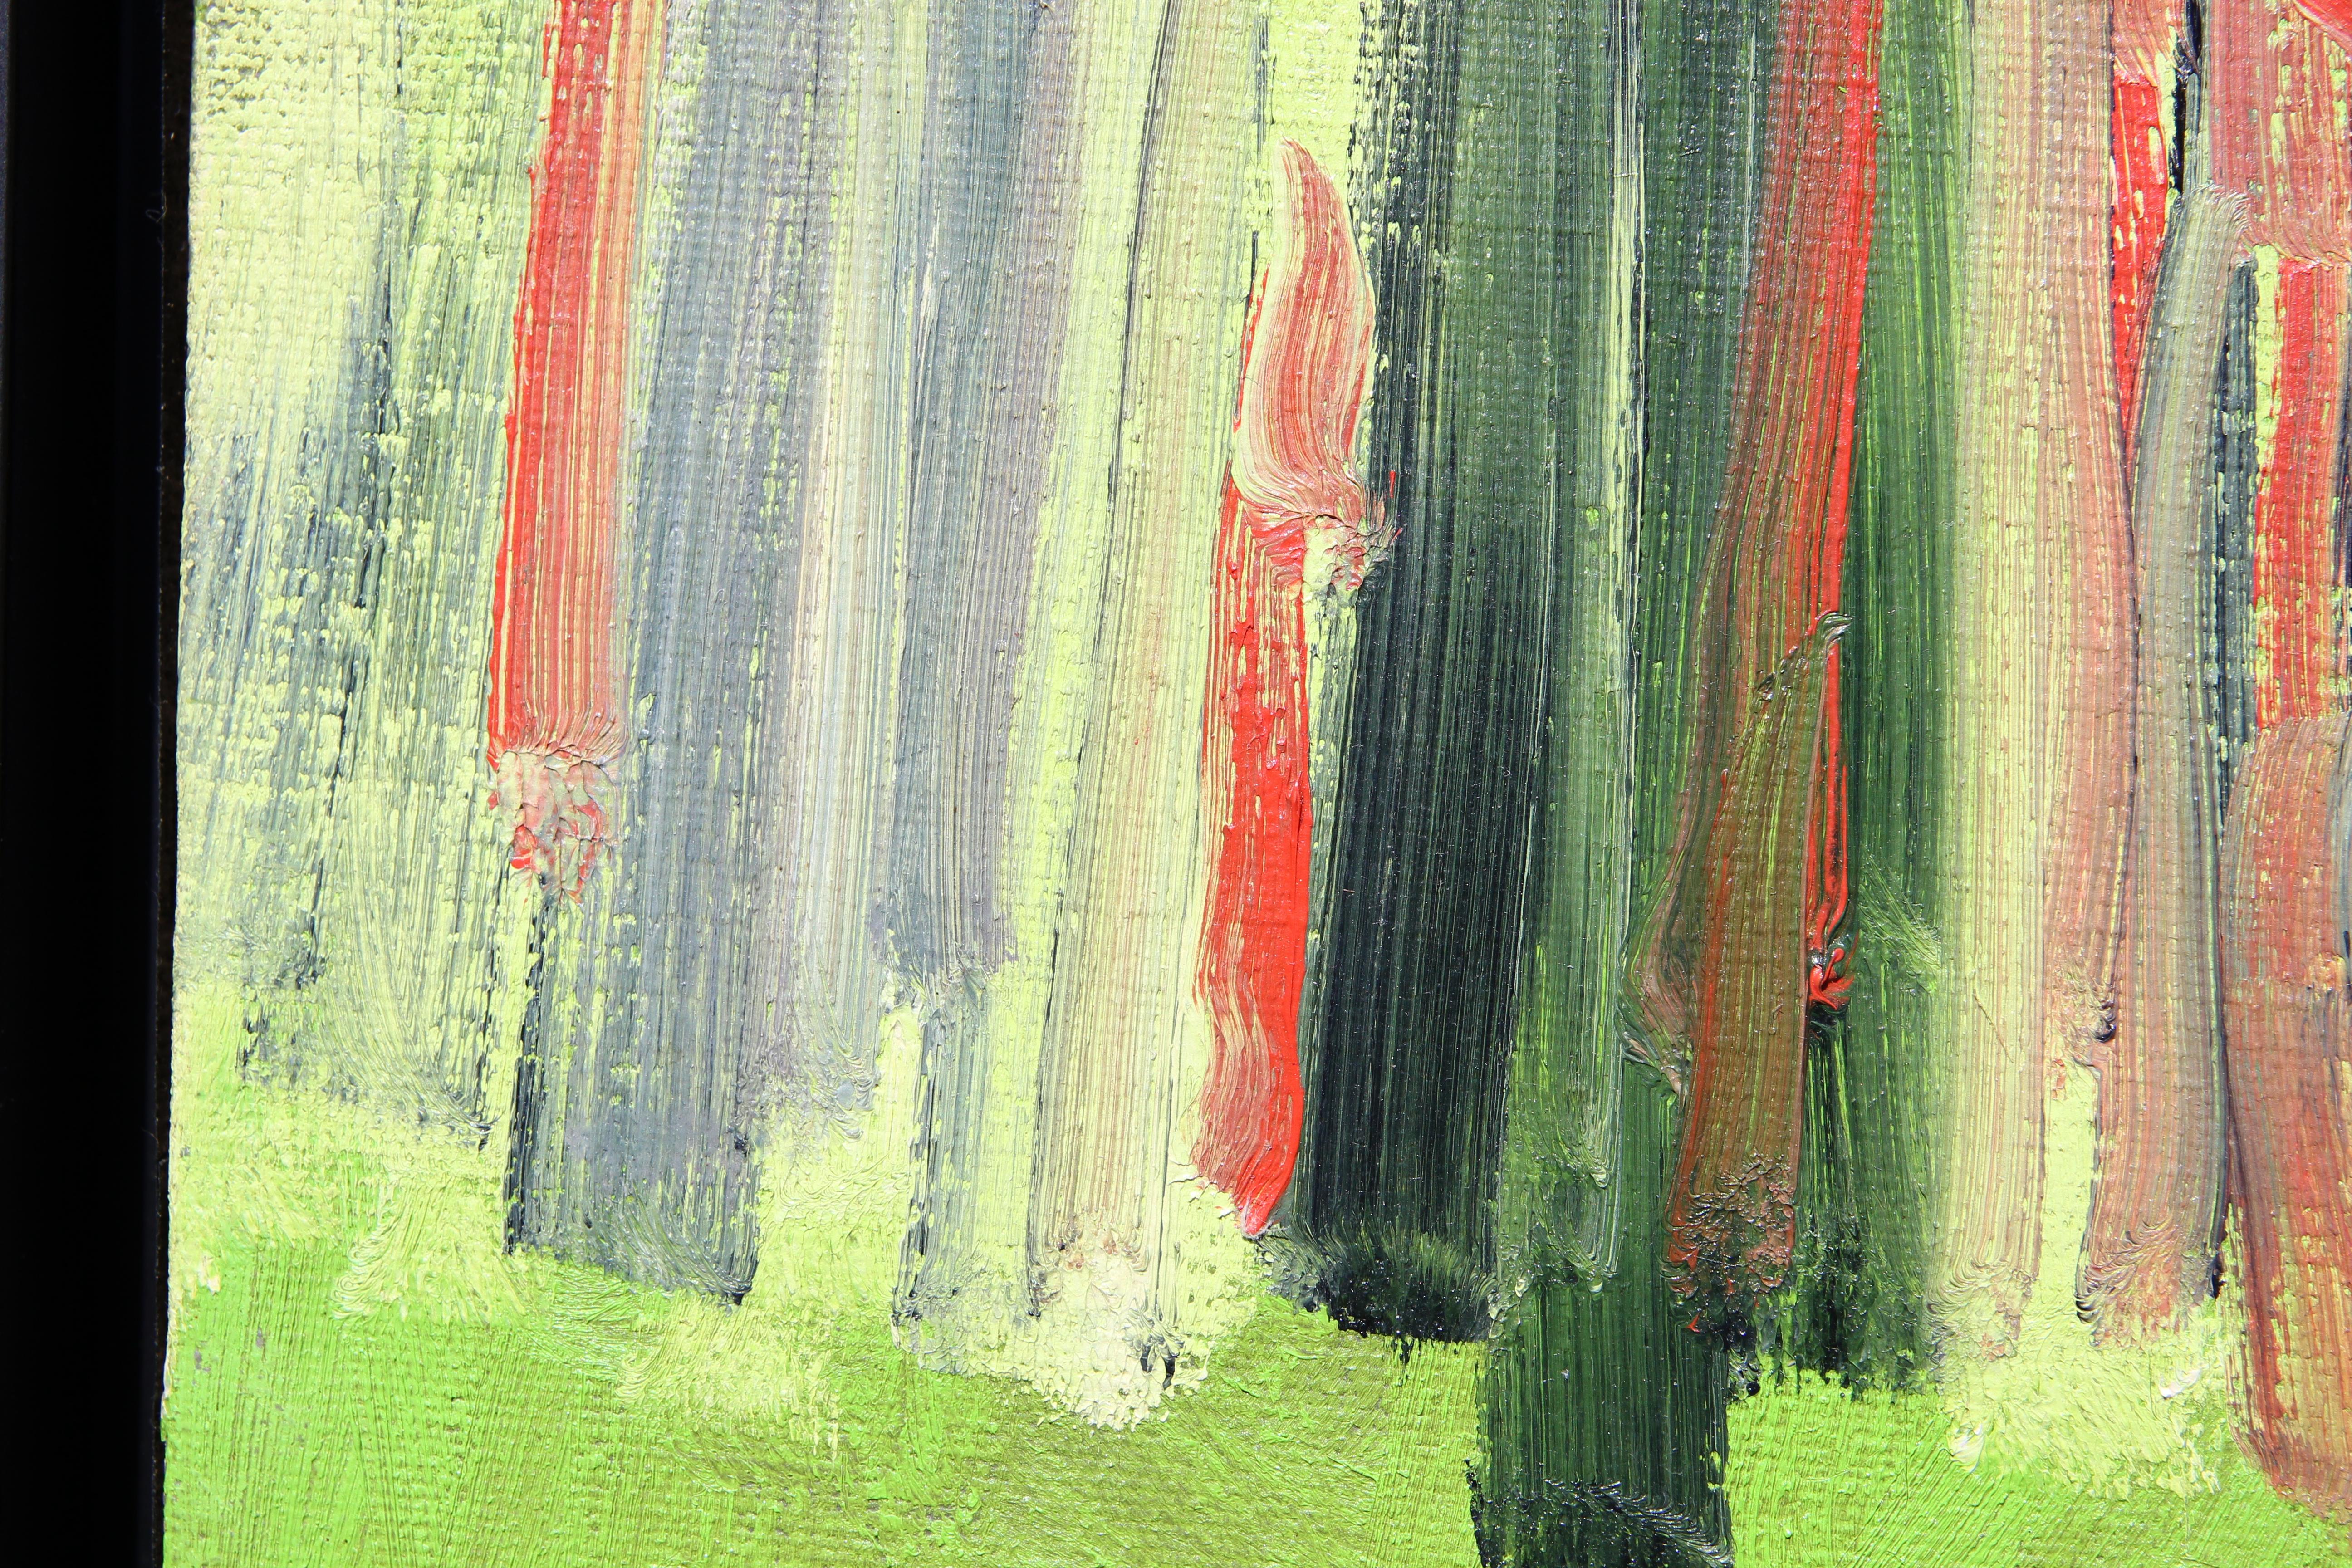 Untitled Abstract Colorful Green and Orange Striped Painting 3